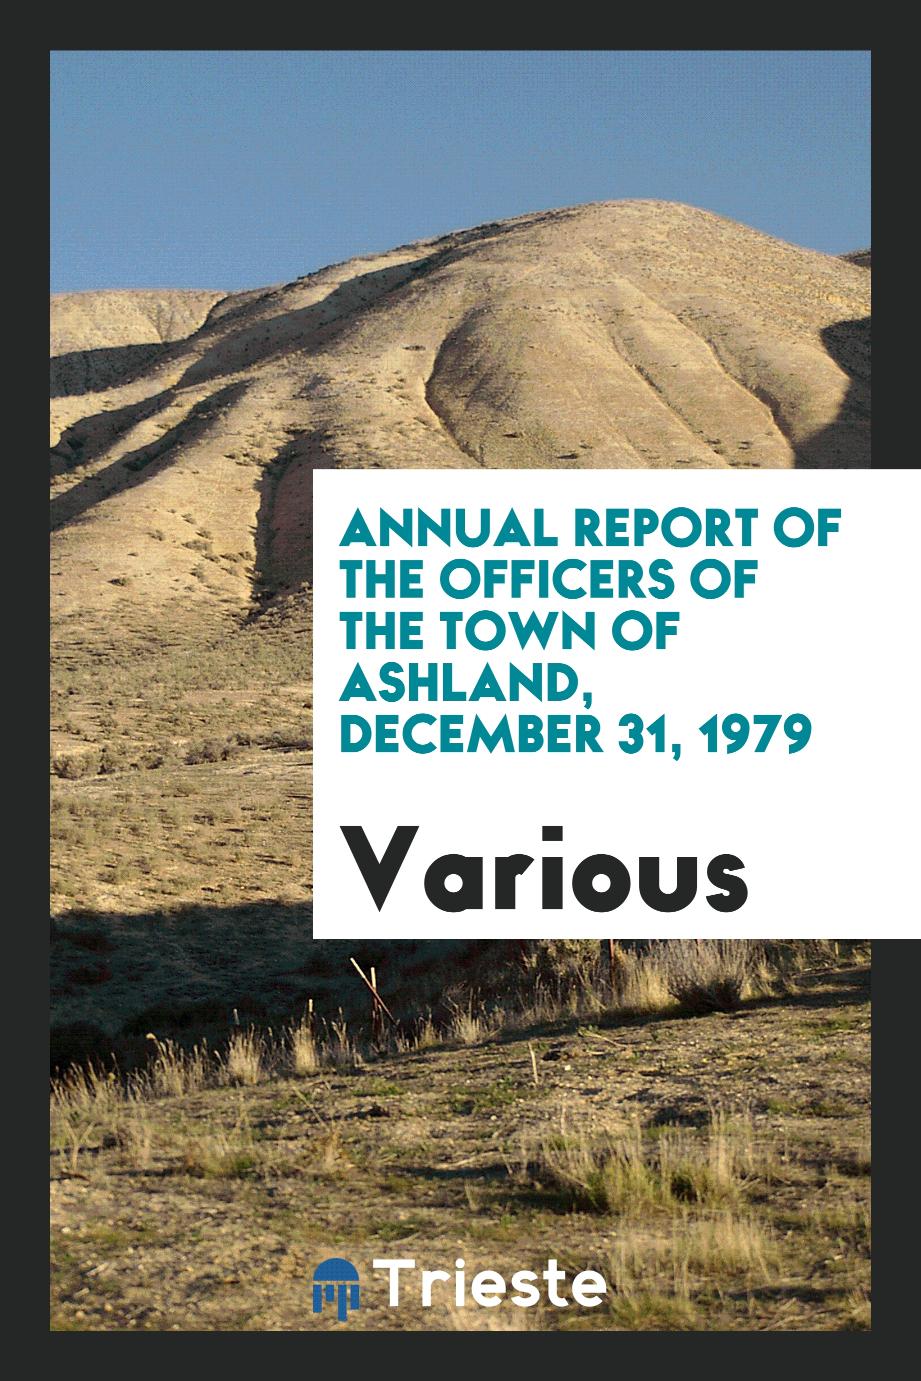 Annual Report of the Officers of the Town of Ashland, December 31, 1979